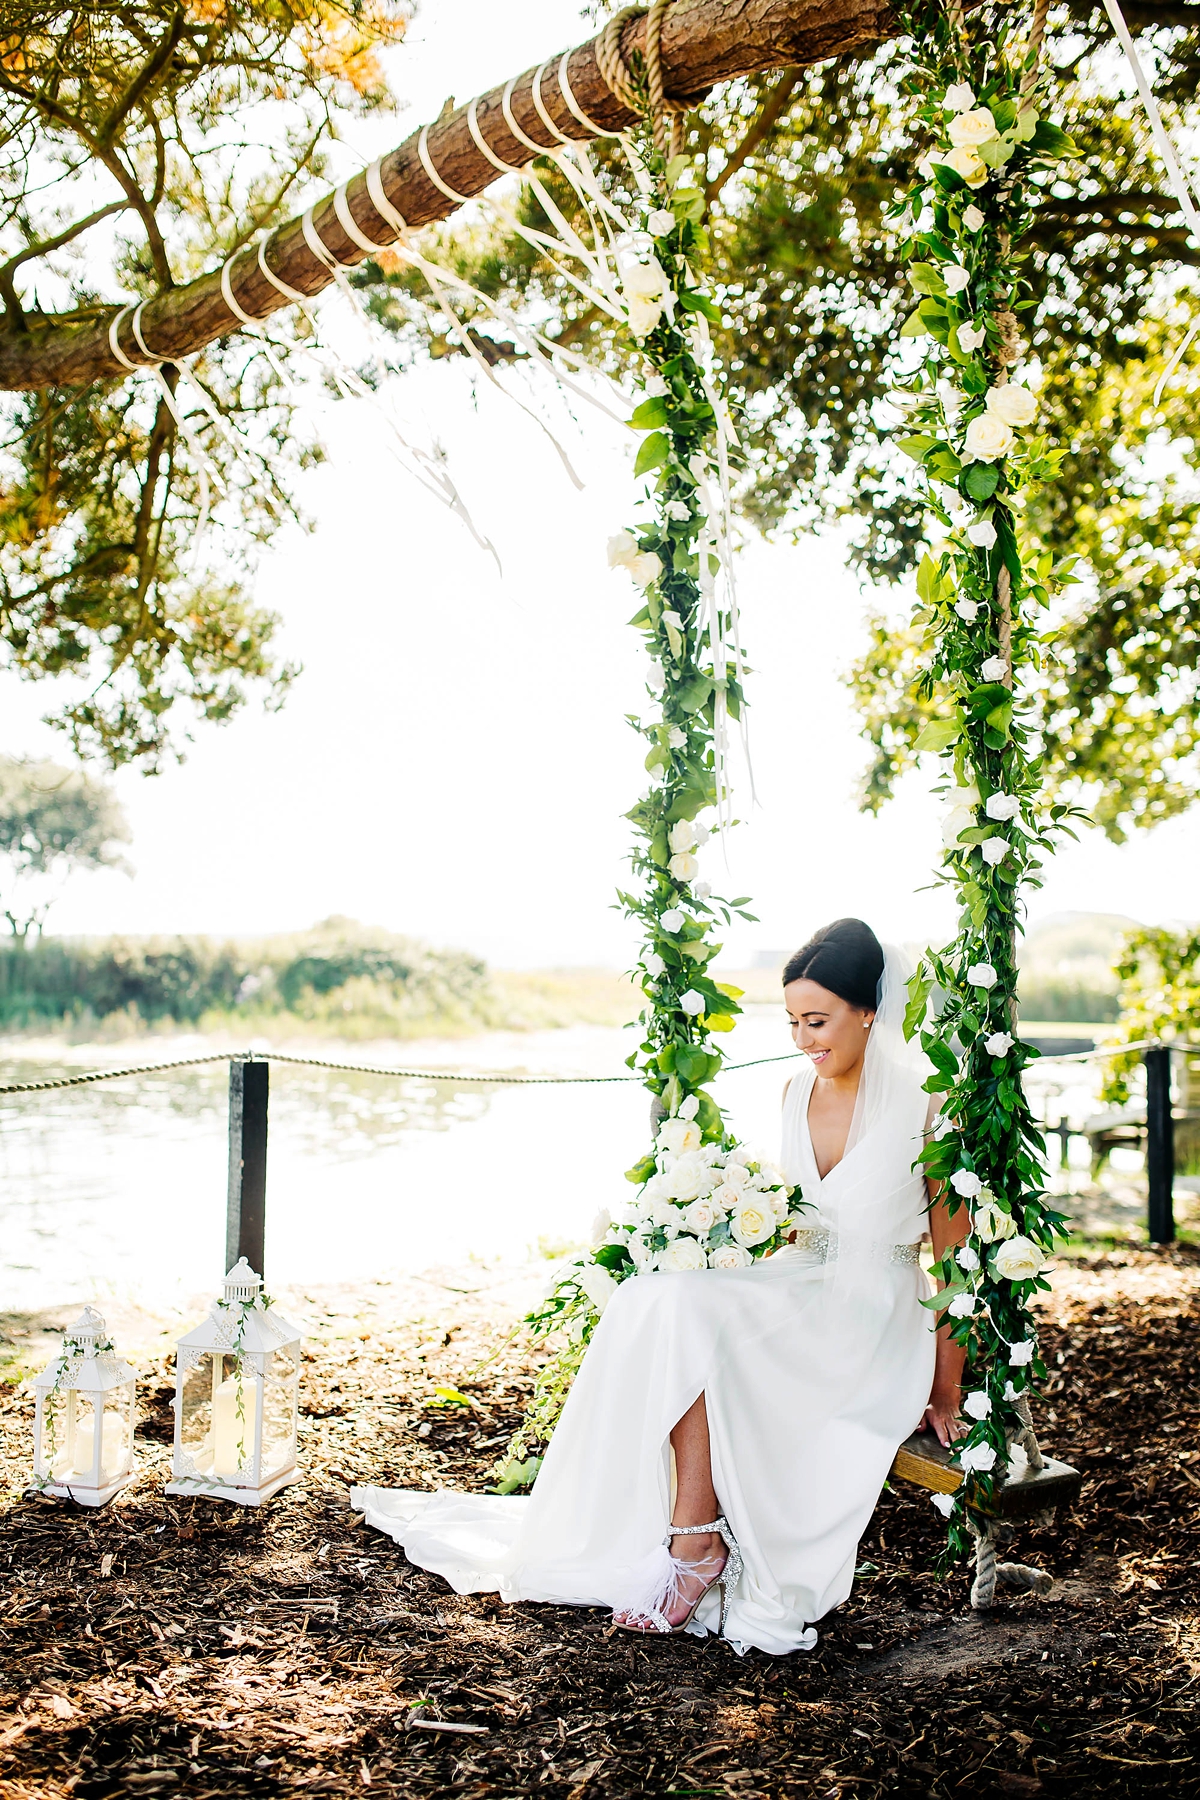 26 A Charlie Brear dress for a timeless Beachside wedding in greens and neutrals